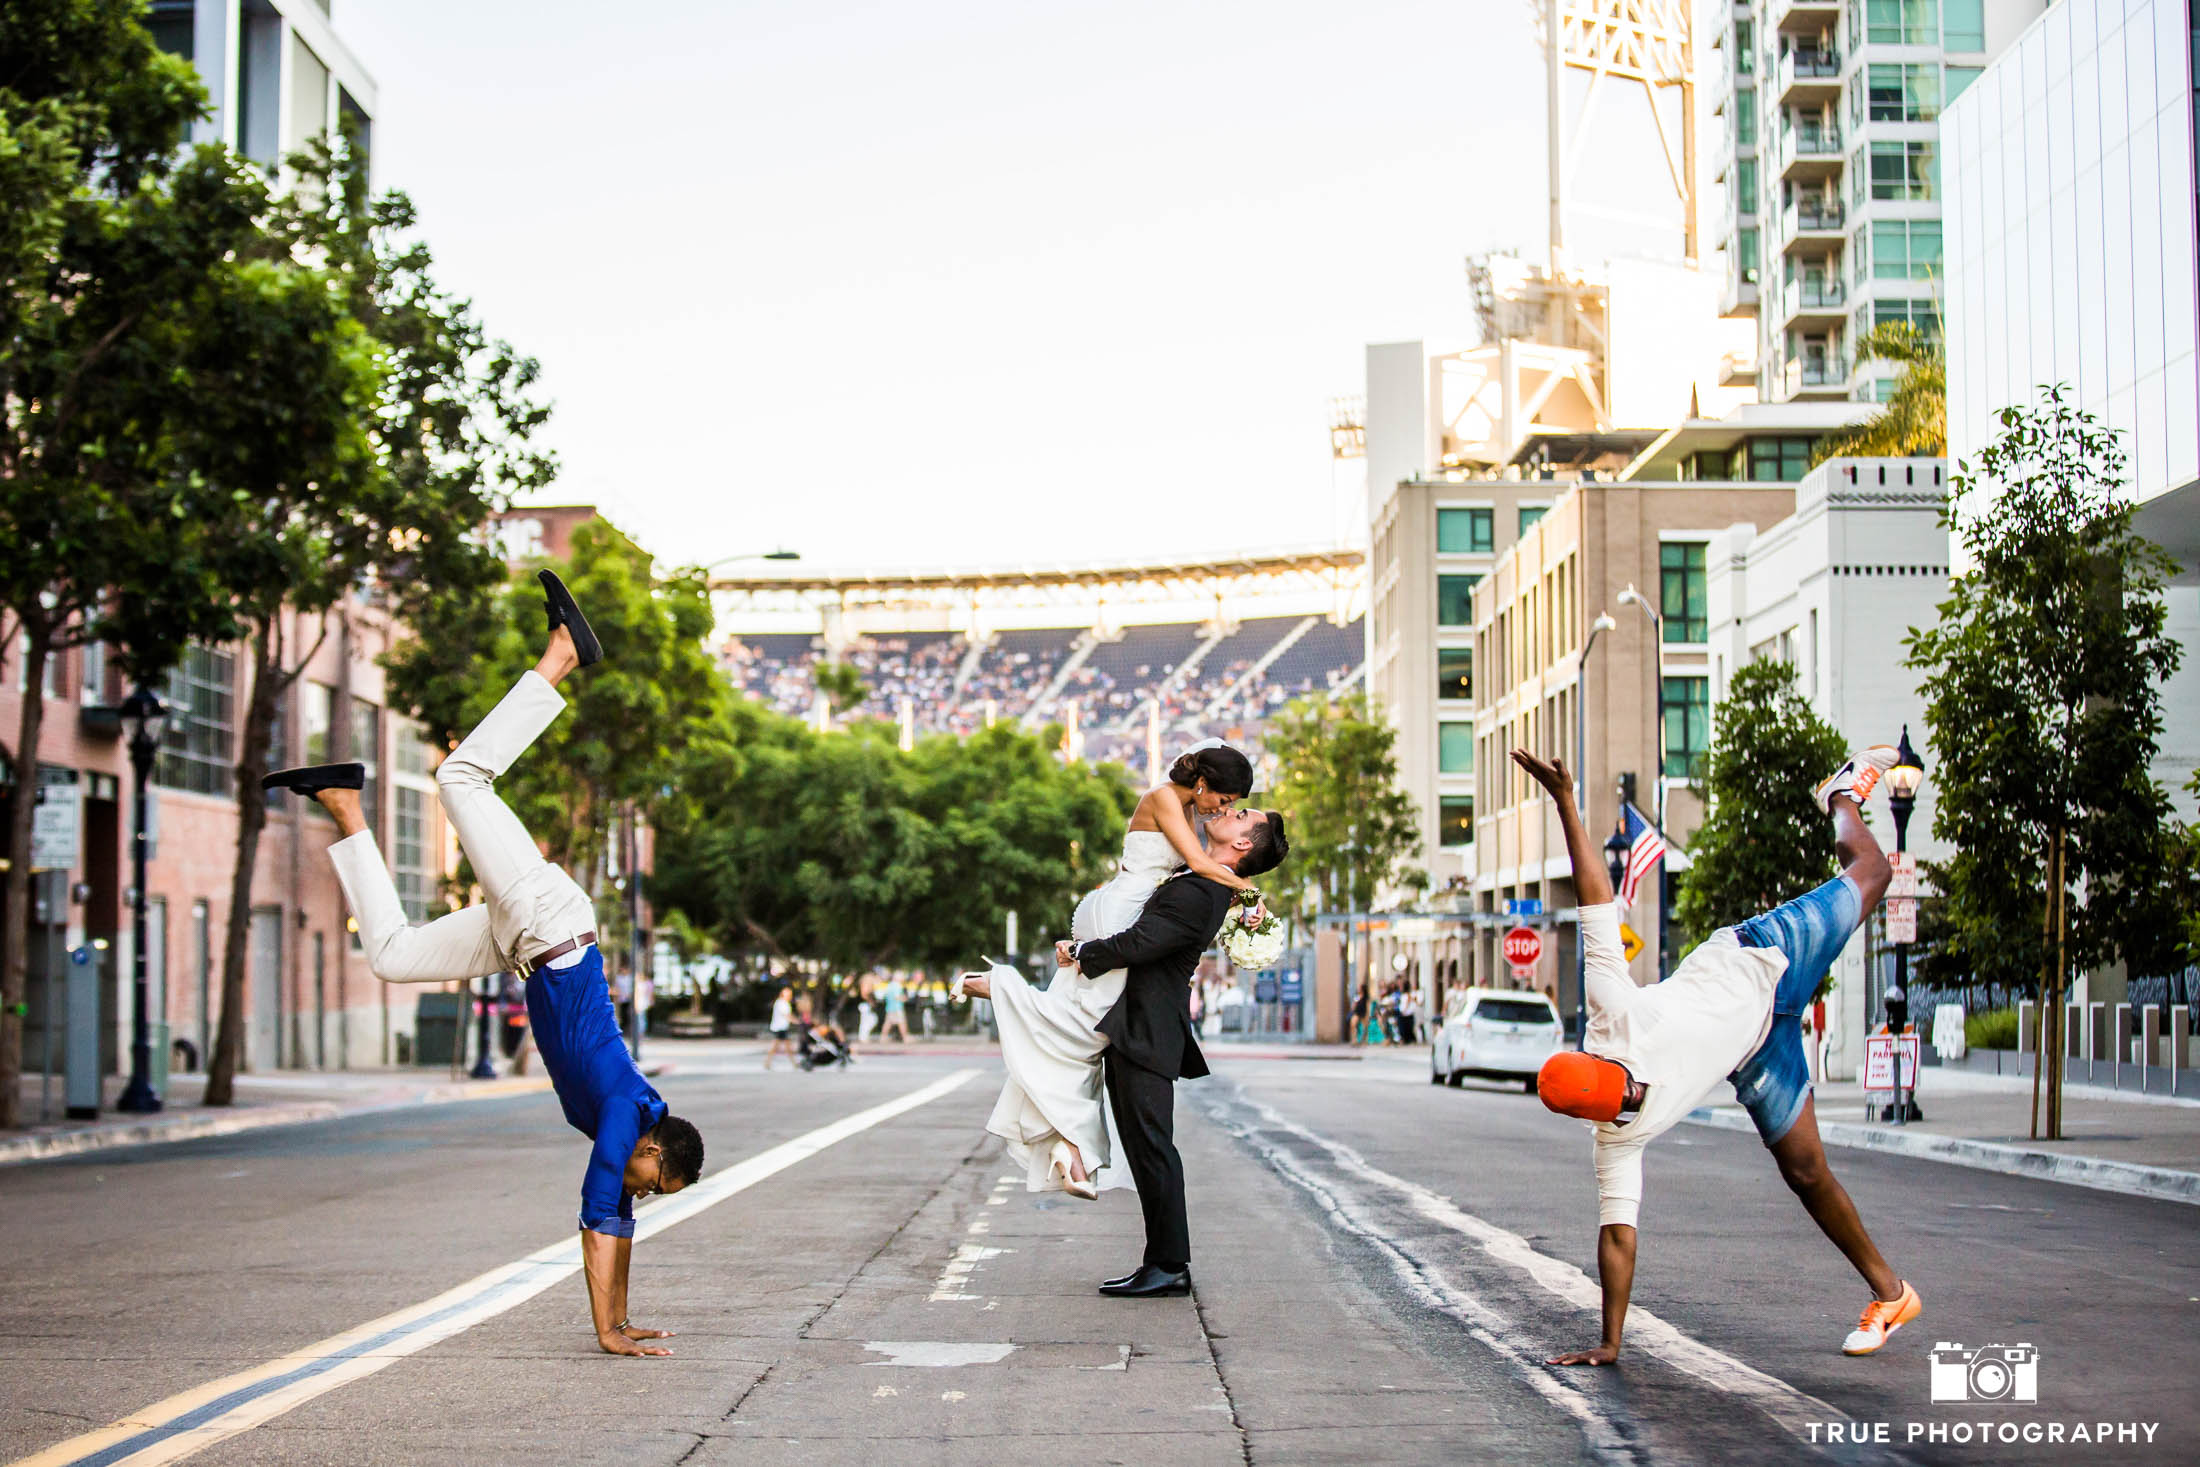 Breakdancers perform as bride and groom kiss in downtown san diego